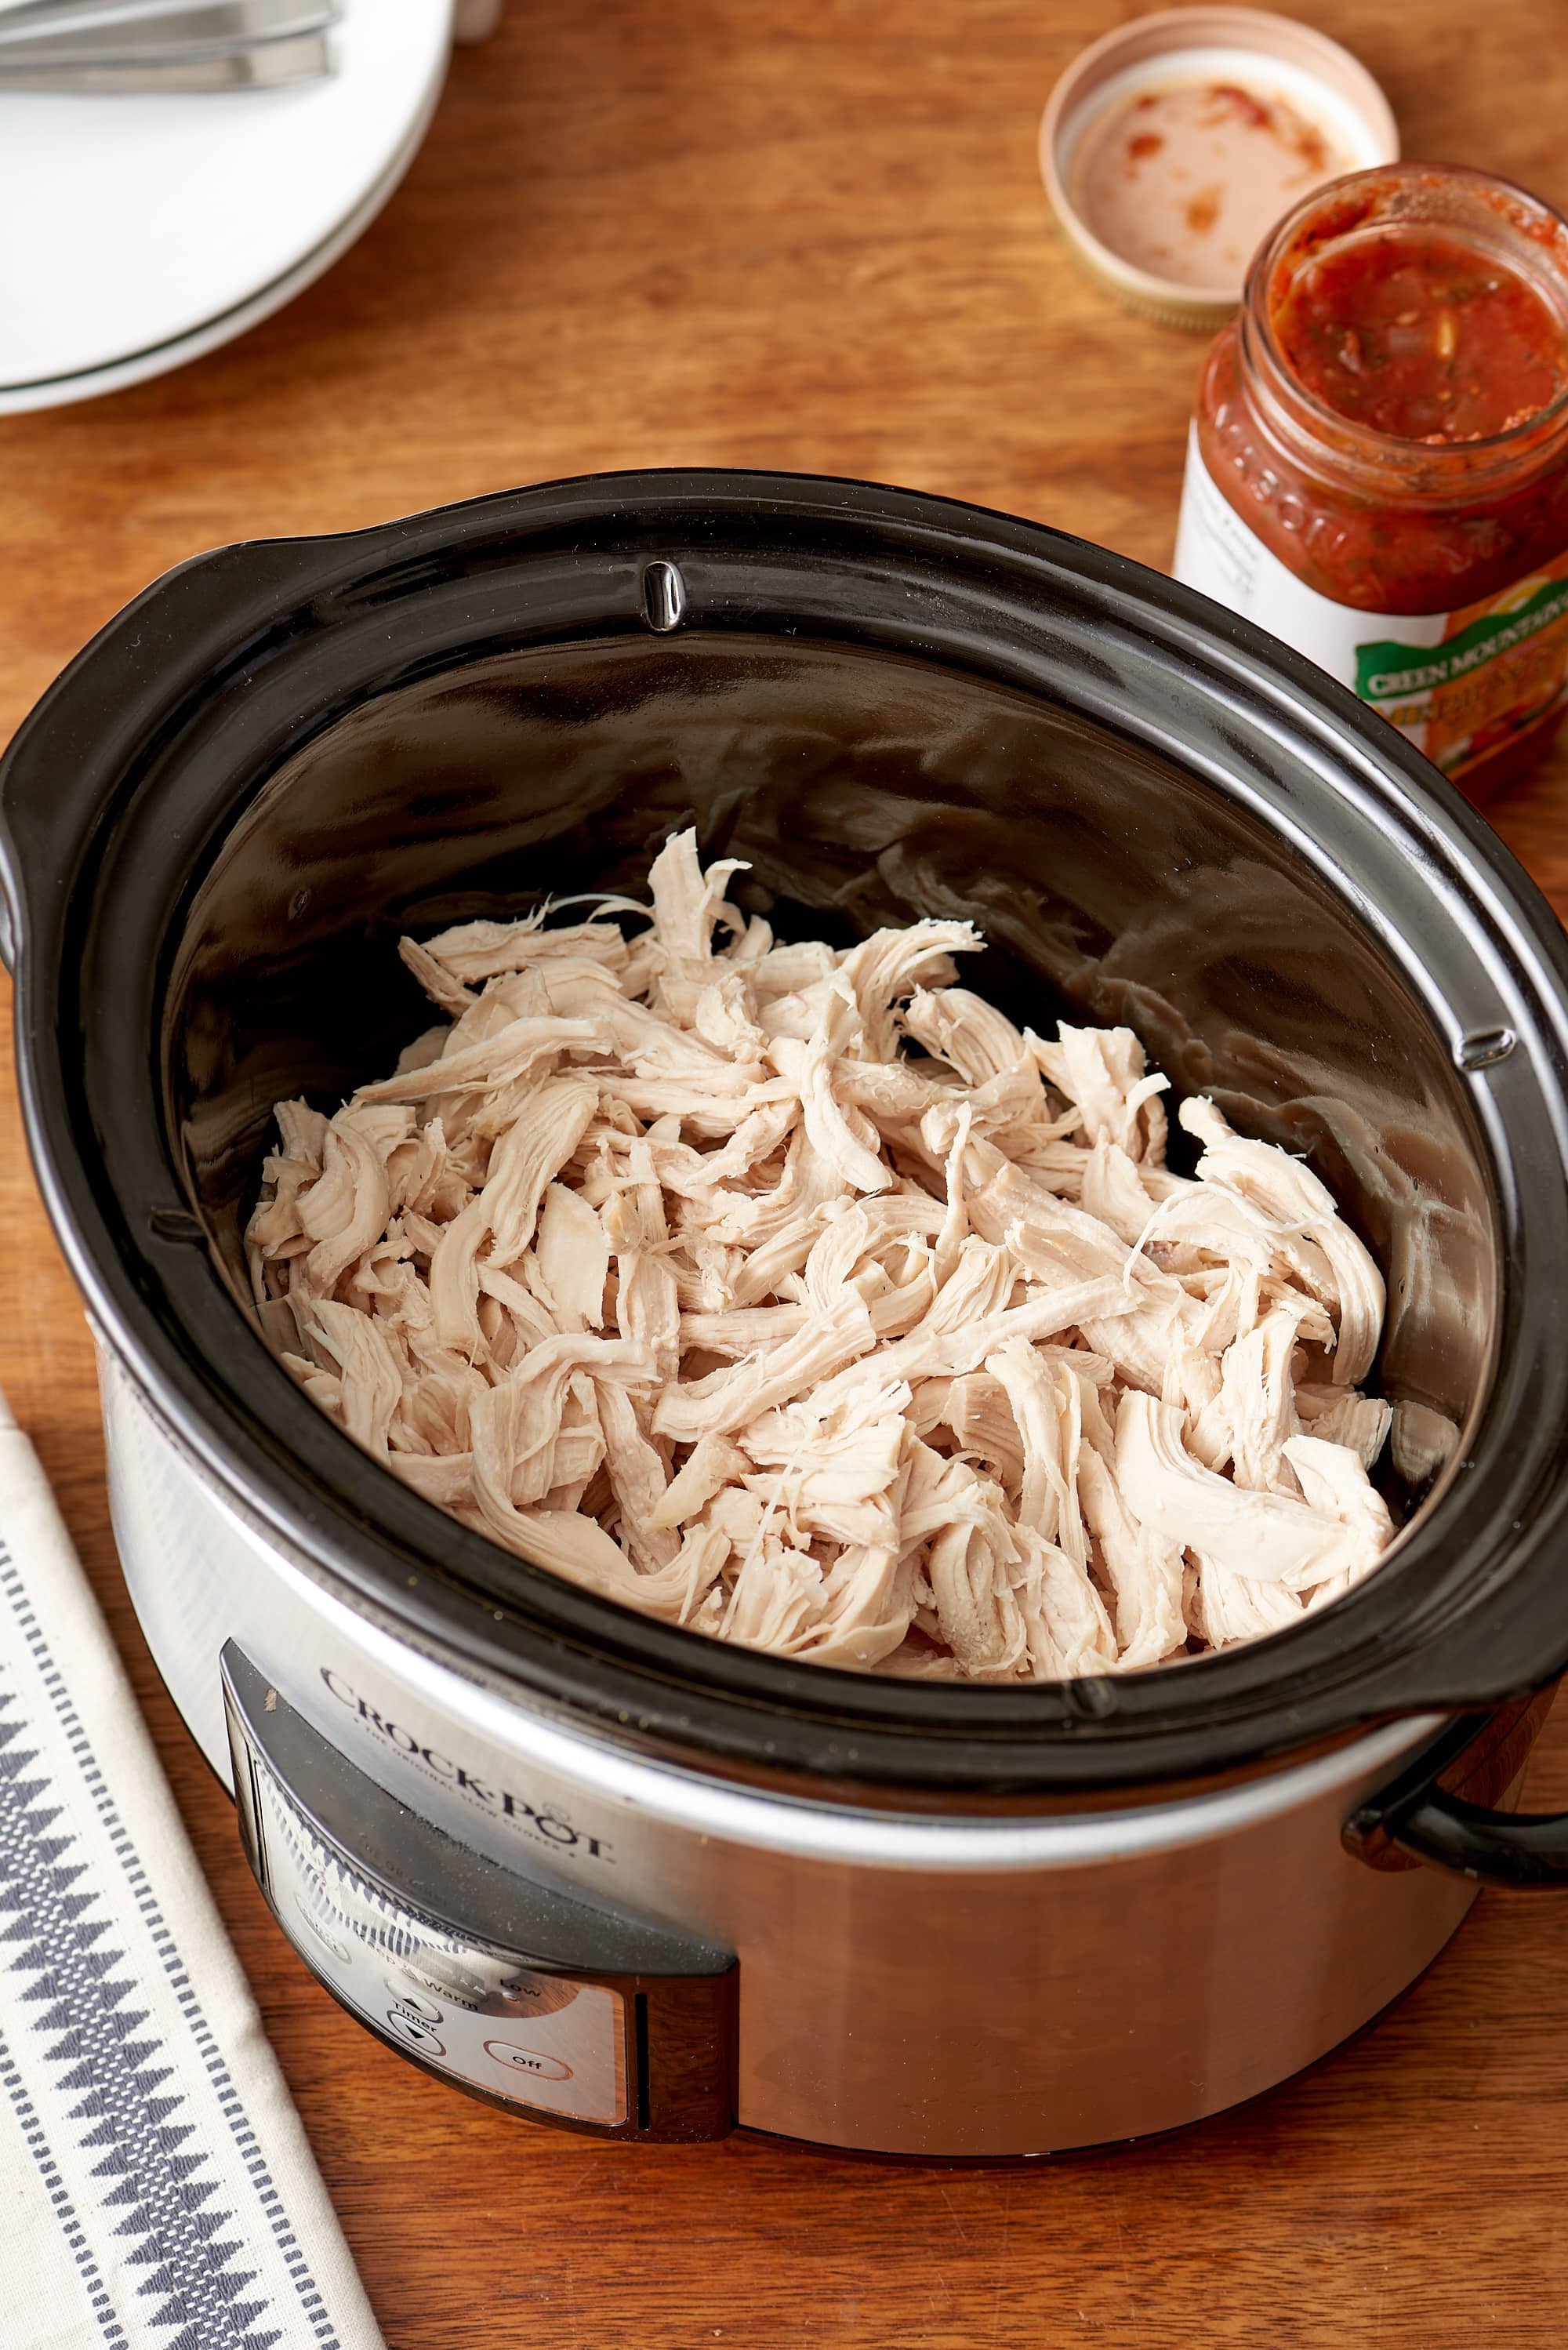 How To Make Easy Shredded Chicken in the Slow Cooker | Kitchn